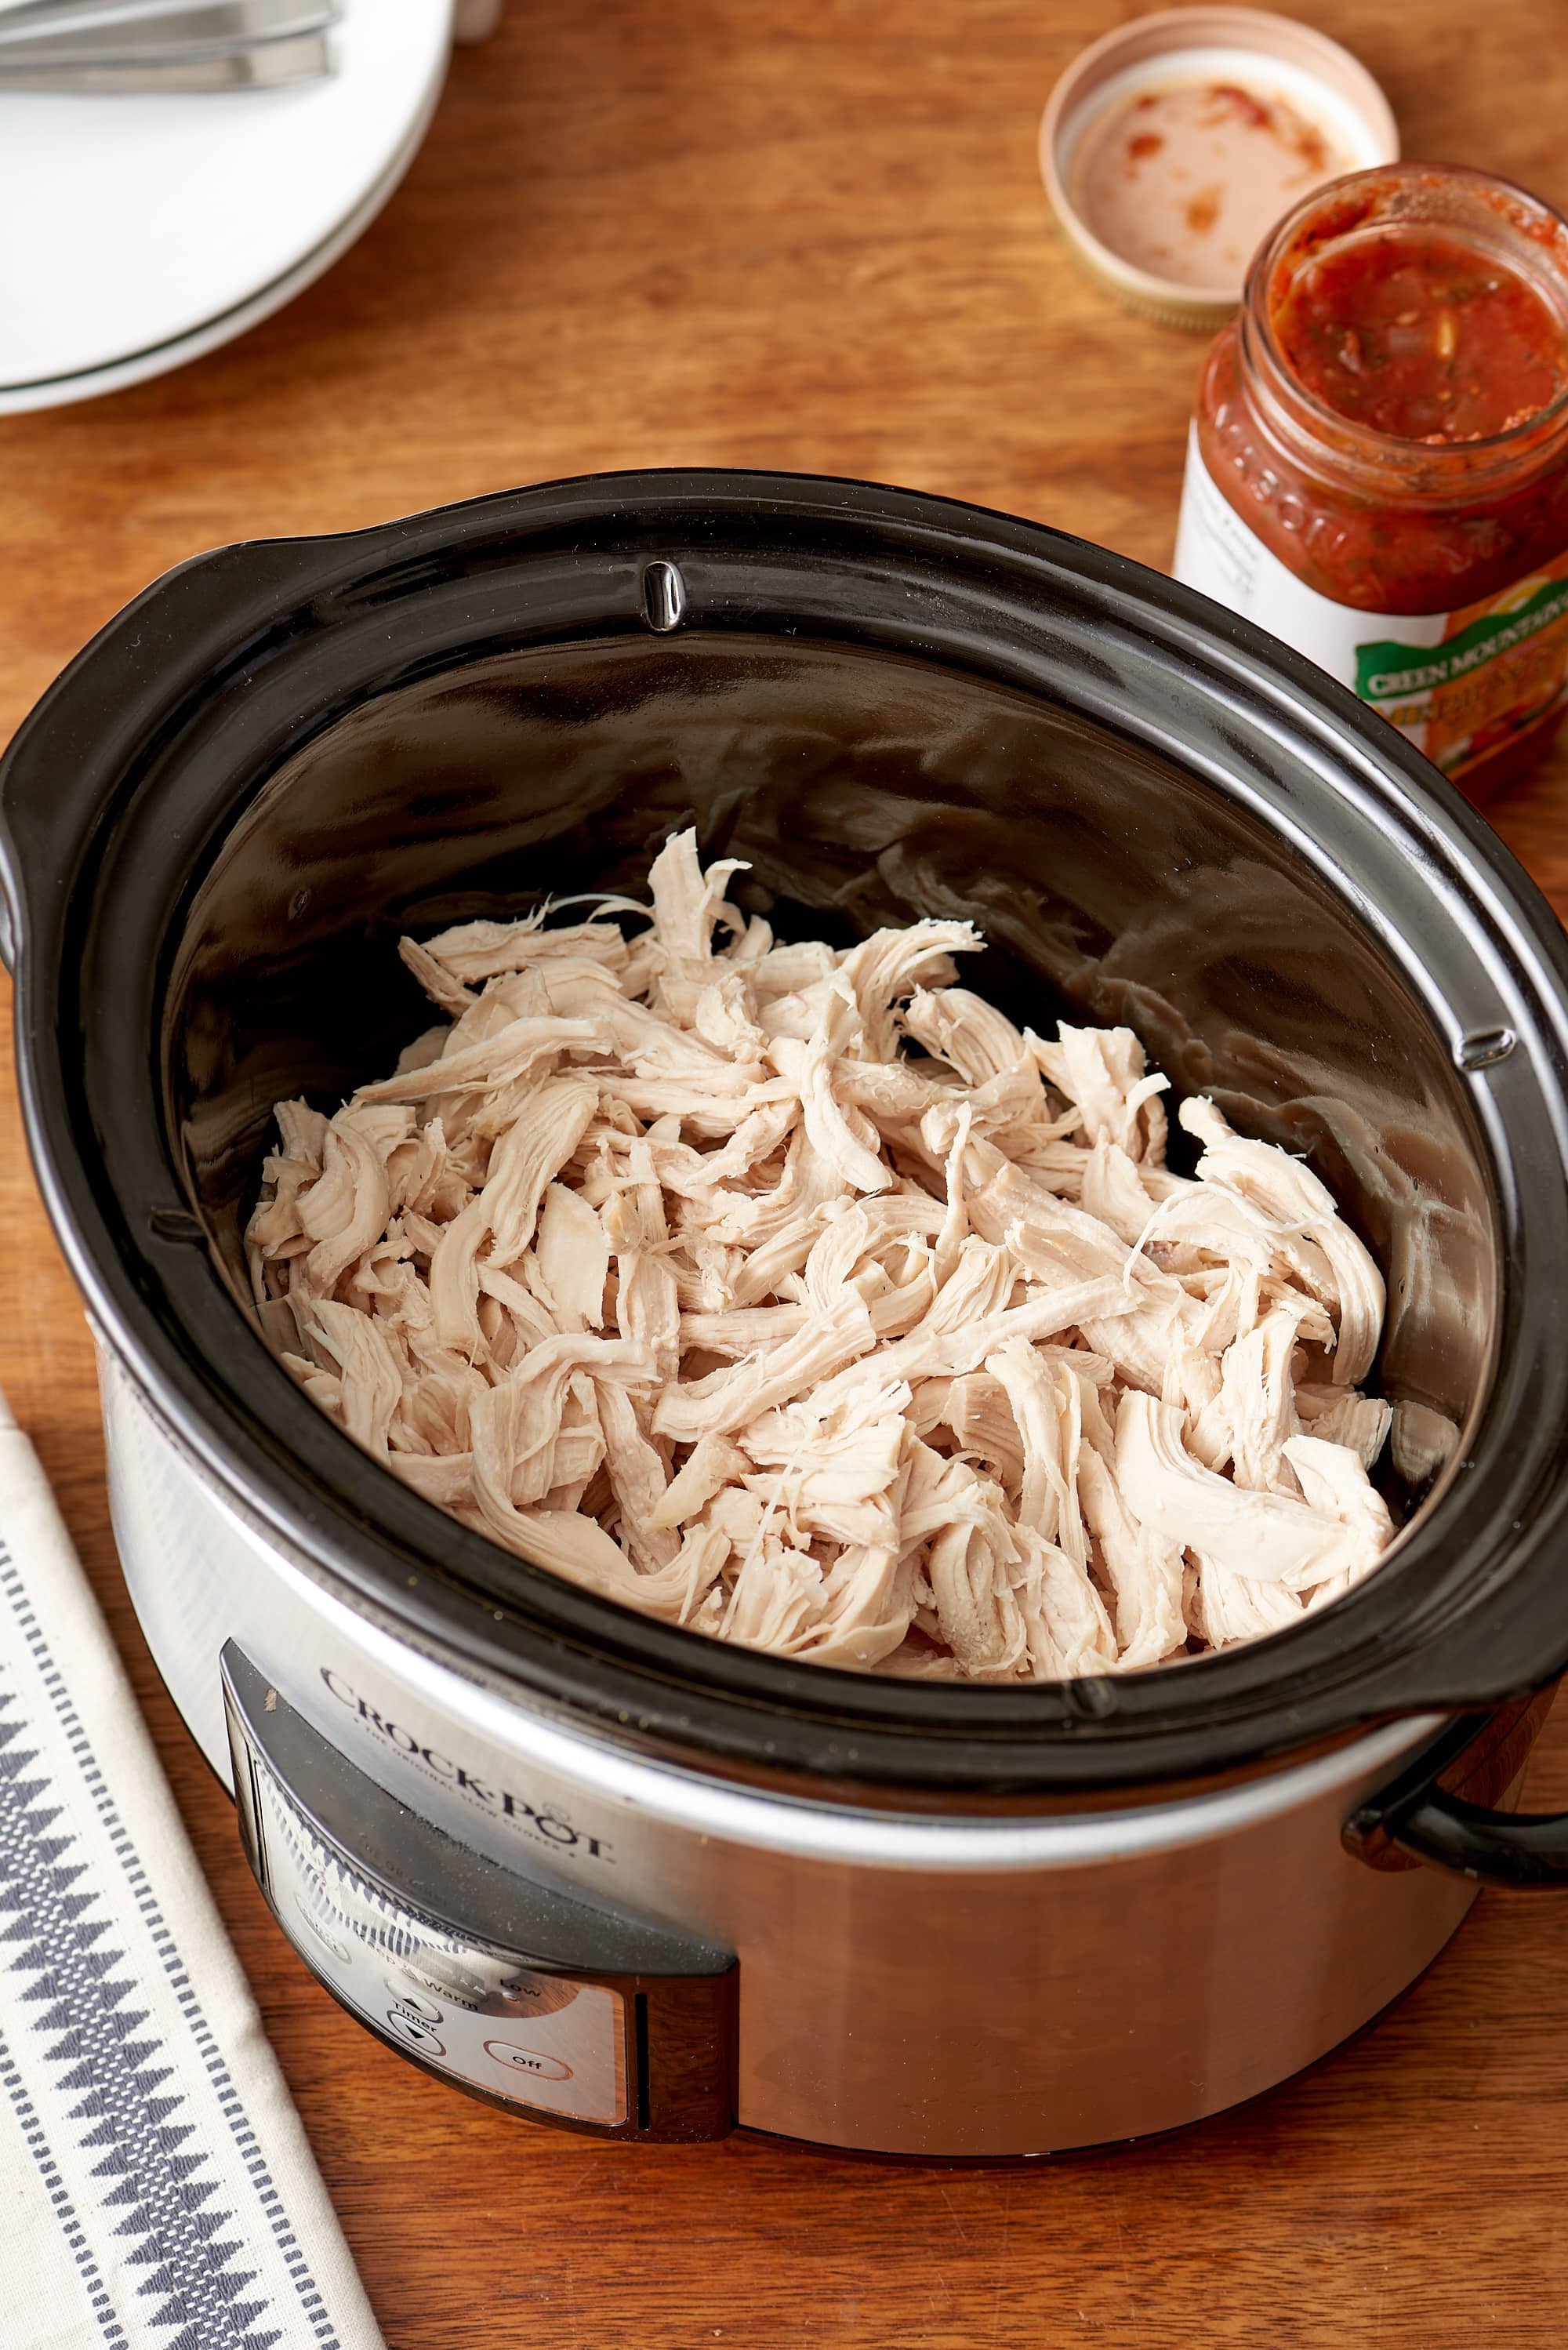 How To Make Easy Shredded Chicken in the Slow Cooker | Kitchn